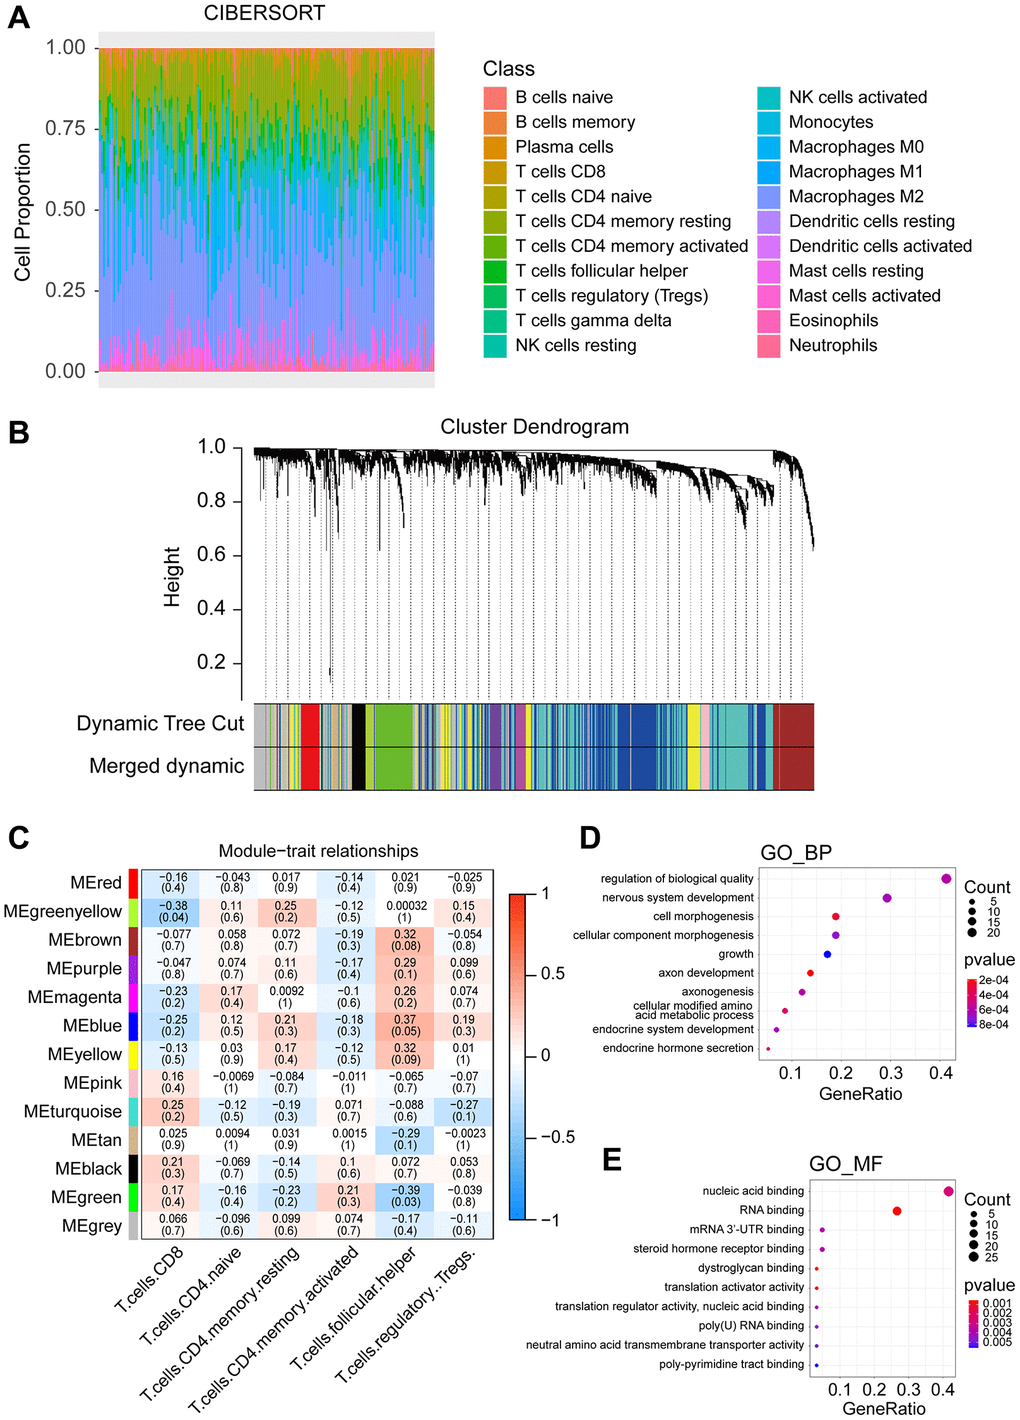 Constructing the weighted co-expression network based on RBP genes and identifying key modules. (A) Infiltration ratio of 22 immune cells in DH wild-type GBM samples. (B) Hierarchical cluster analysis was conducted to detect co-expression clusters of the RBP genes. Each colour represents a module. (C) Correlation between different gene modules and T cell infiltration ratio. The upward numbers in the boxes represent Pearson R values, and the numbers in the brackets represent P-values. (D) Top ten enrichment items of GO